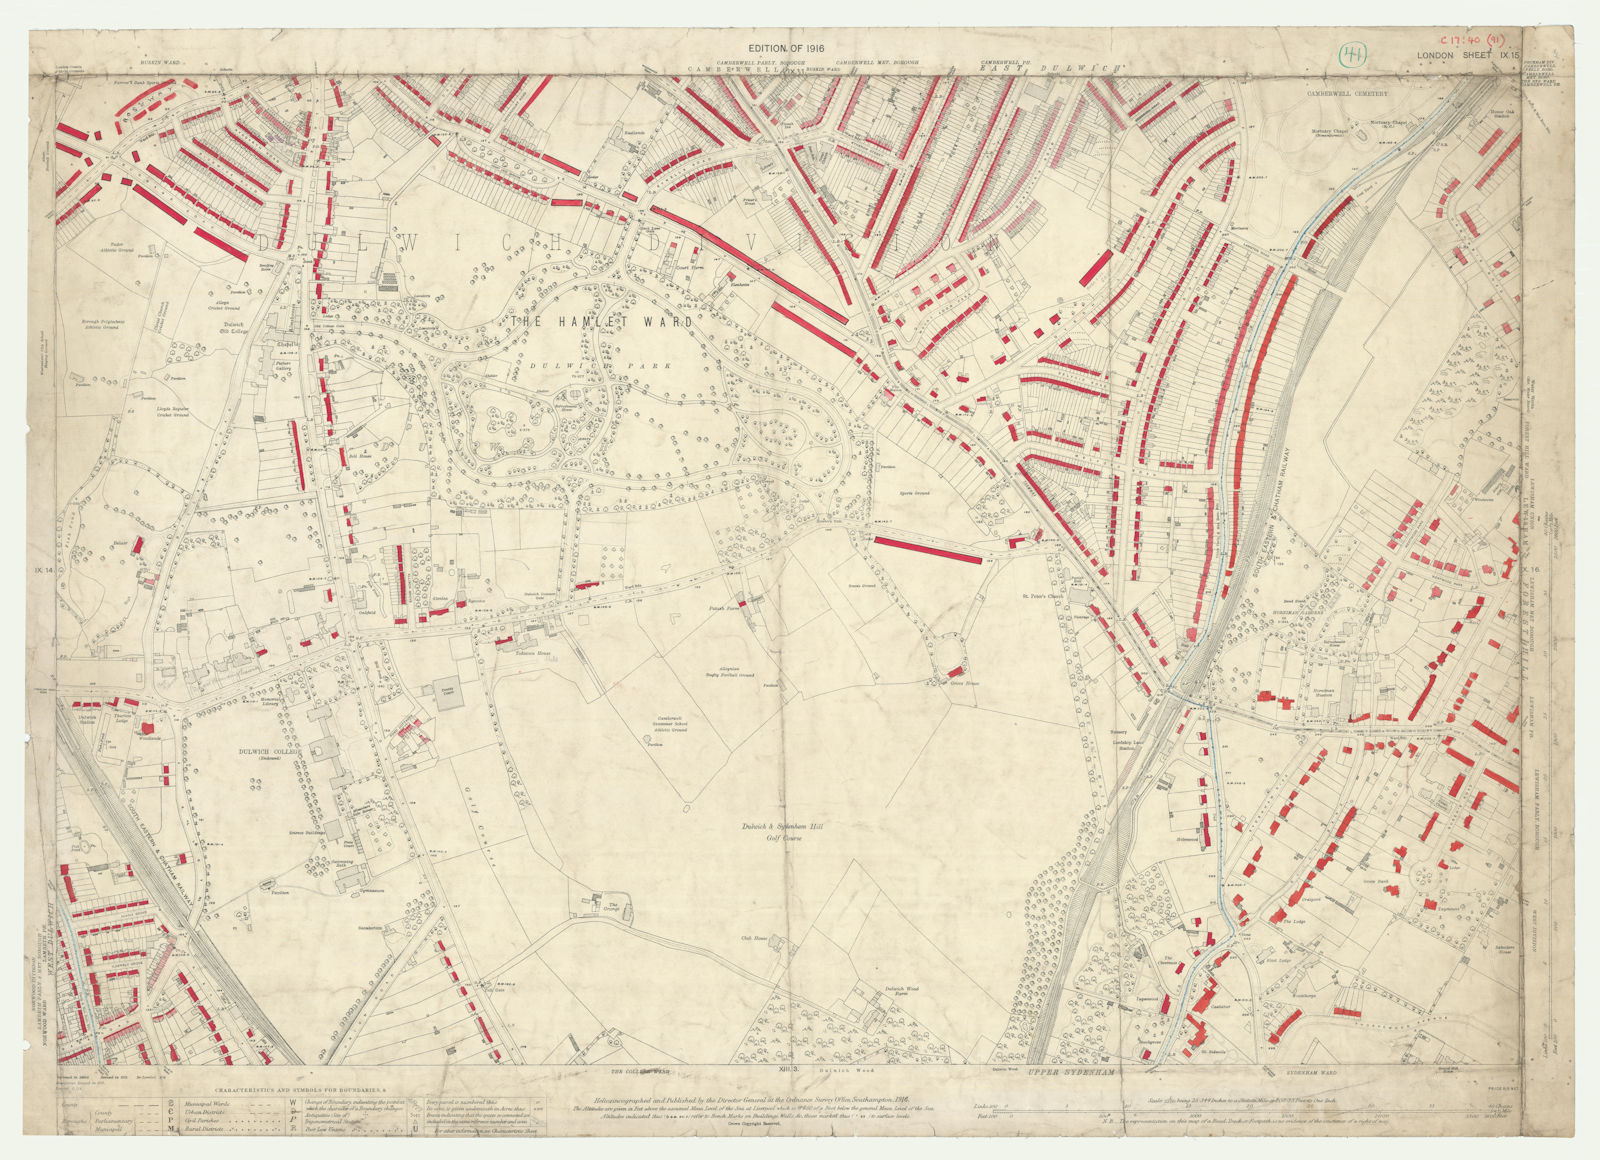 LSE POVERTY OS PROOF MAP Dulwich - Camberwell Cemetery - Upper Sydenham 1928